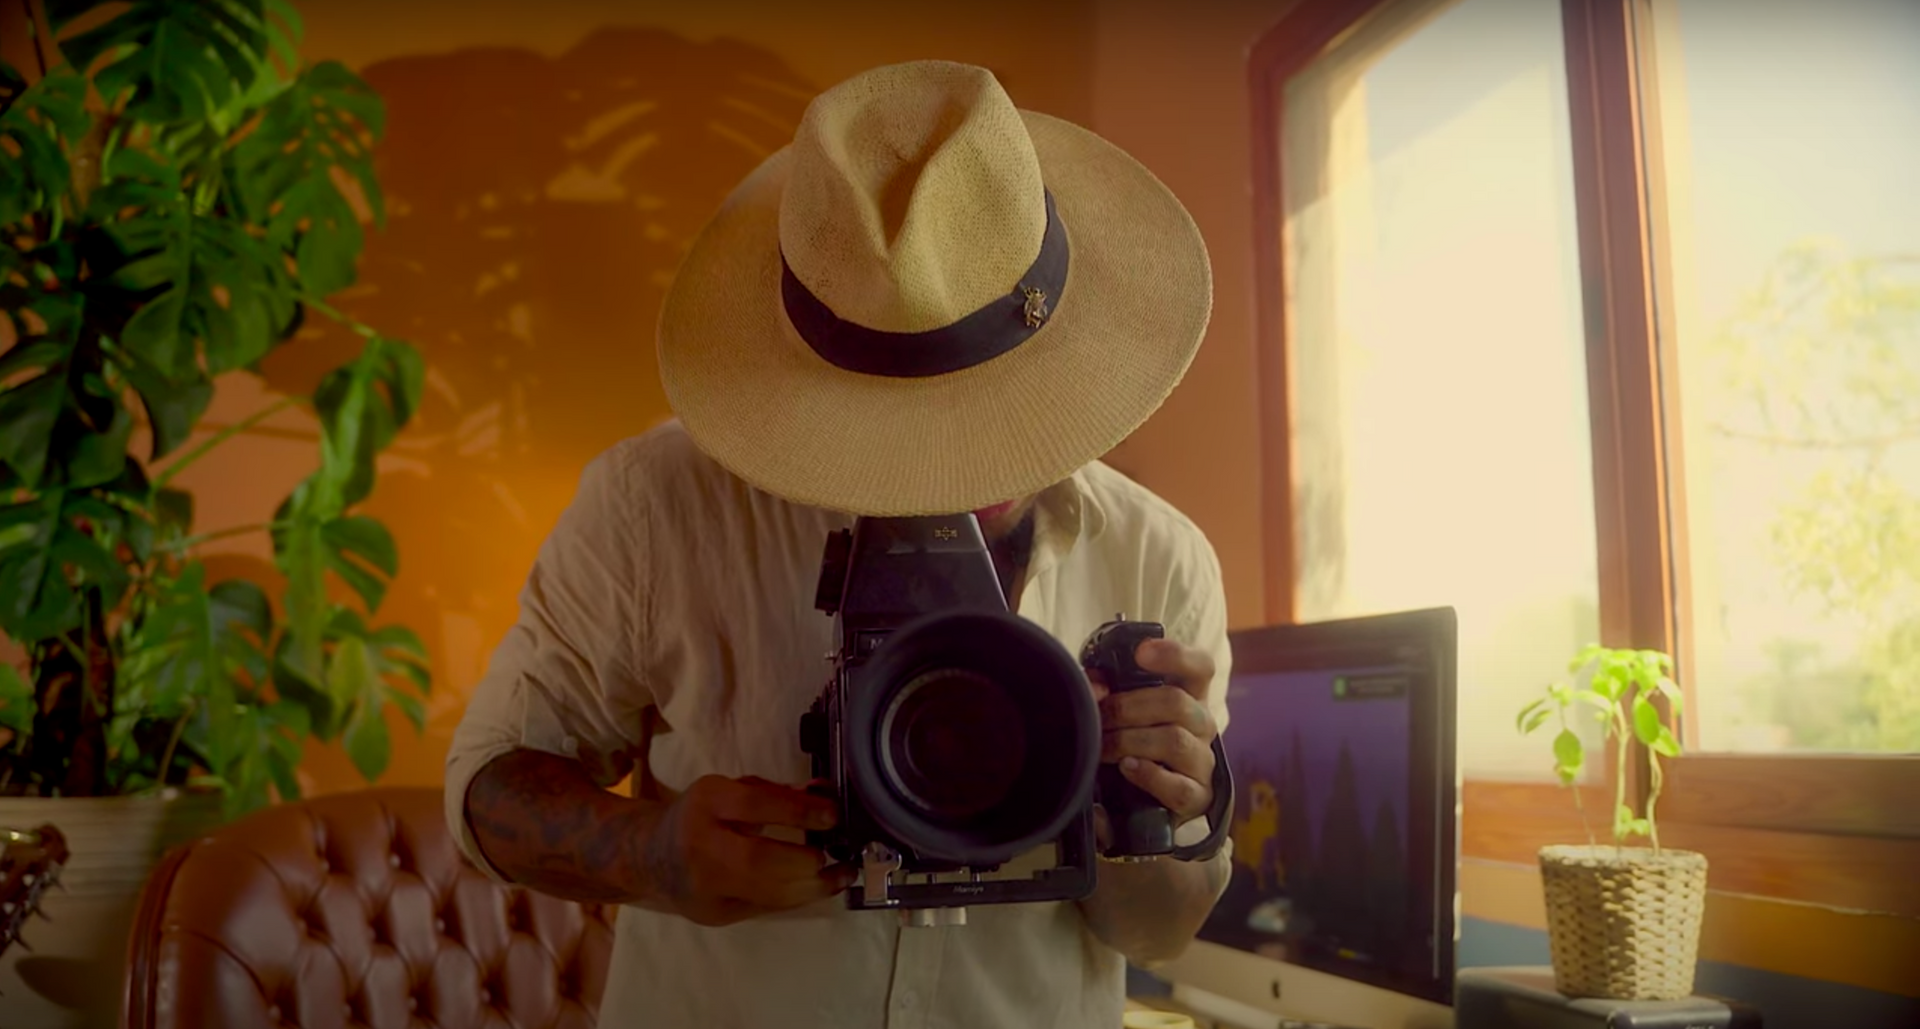 Load video: The journey of an artist who took his vision to the sandpit made, a mark in shifting dunes, and still continues to mold his legacy.